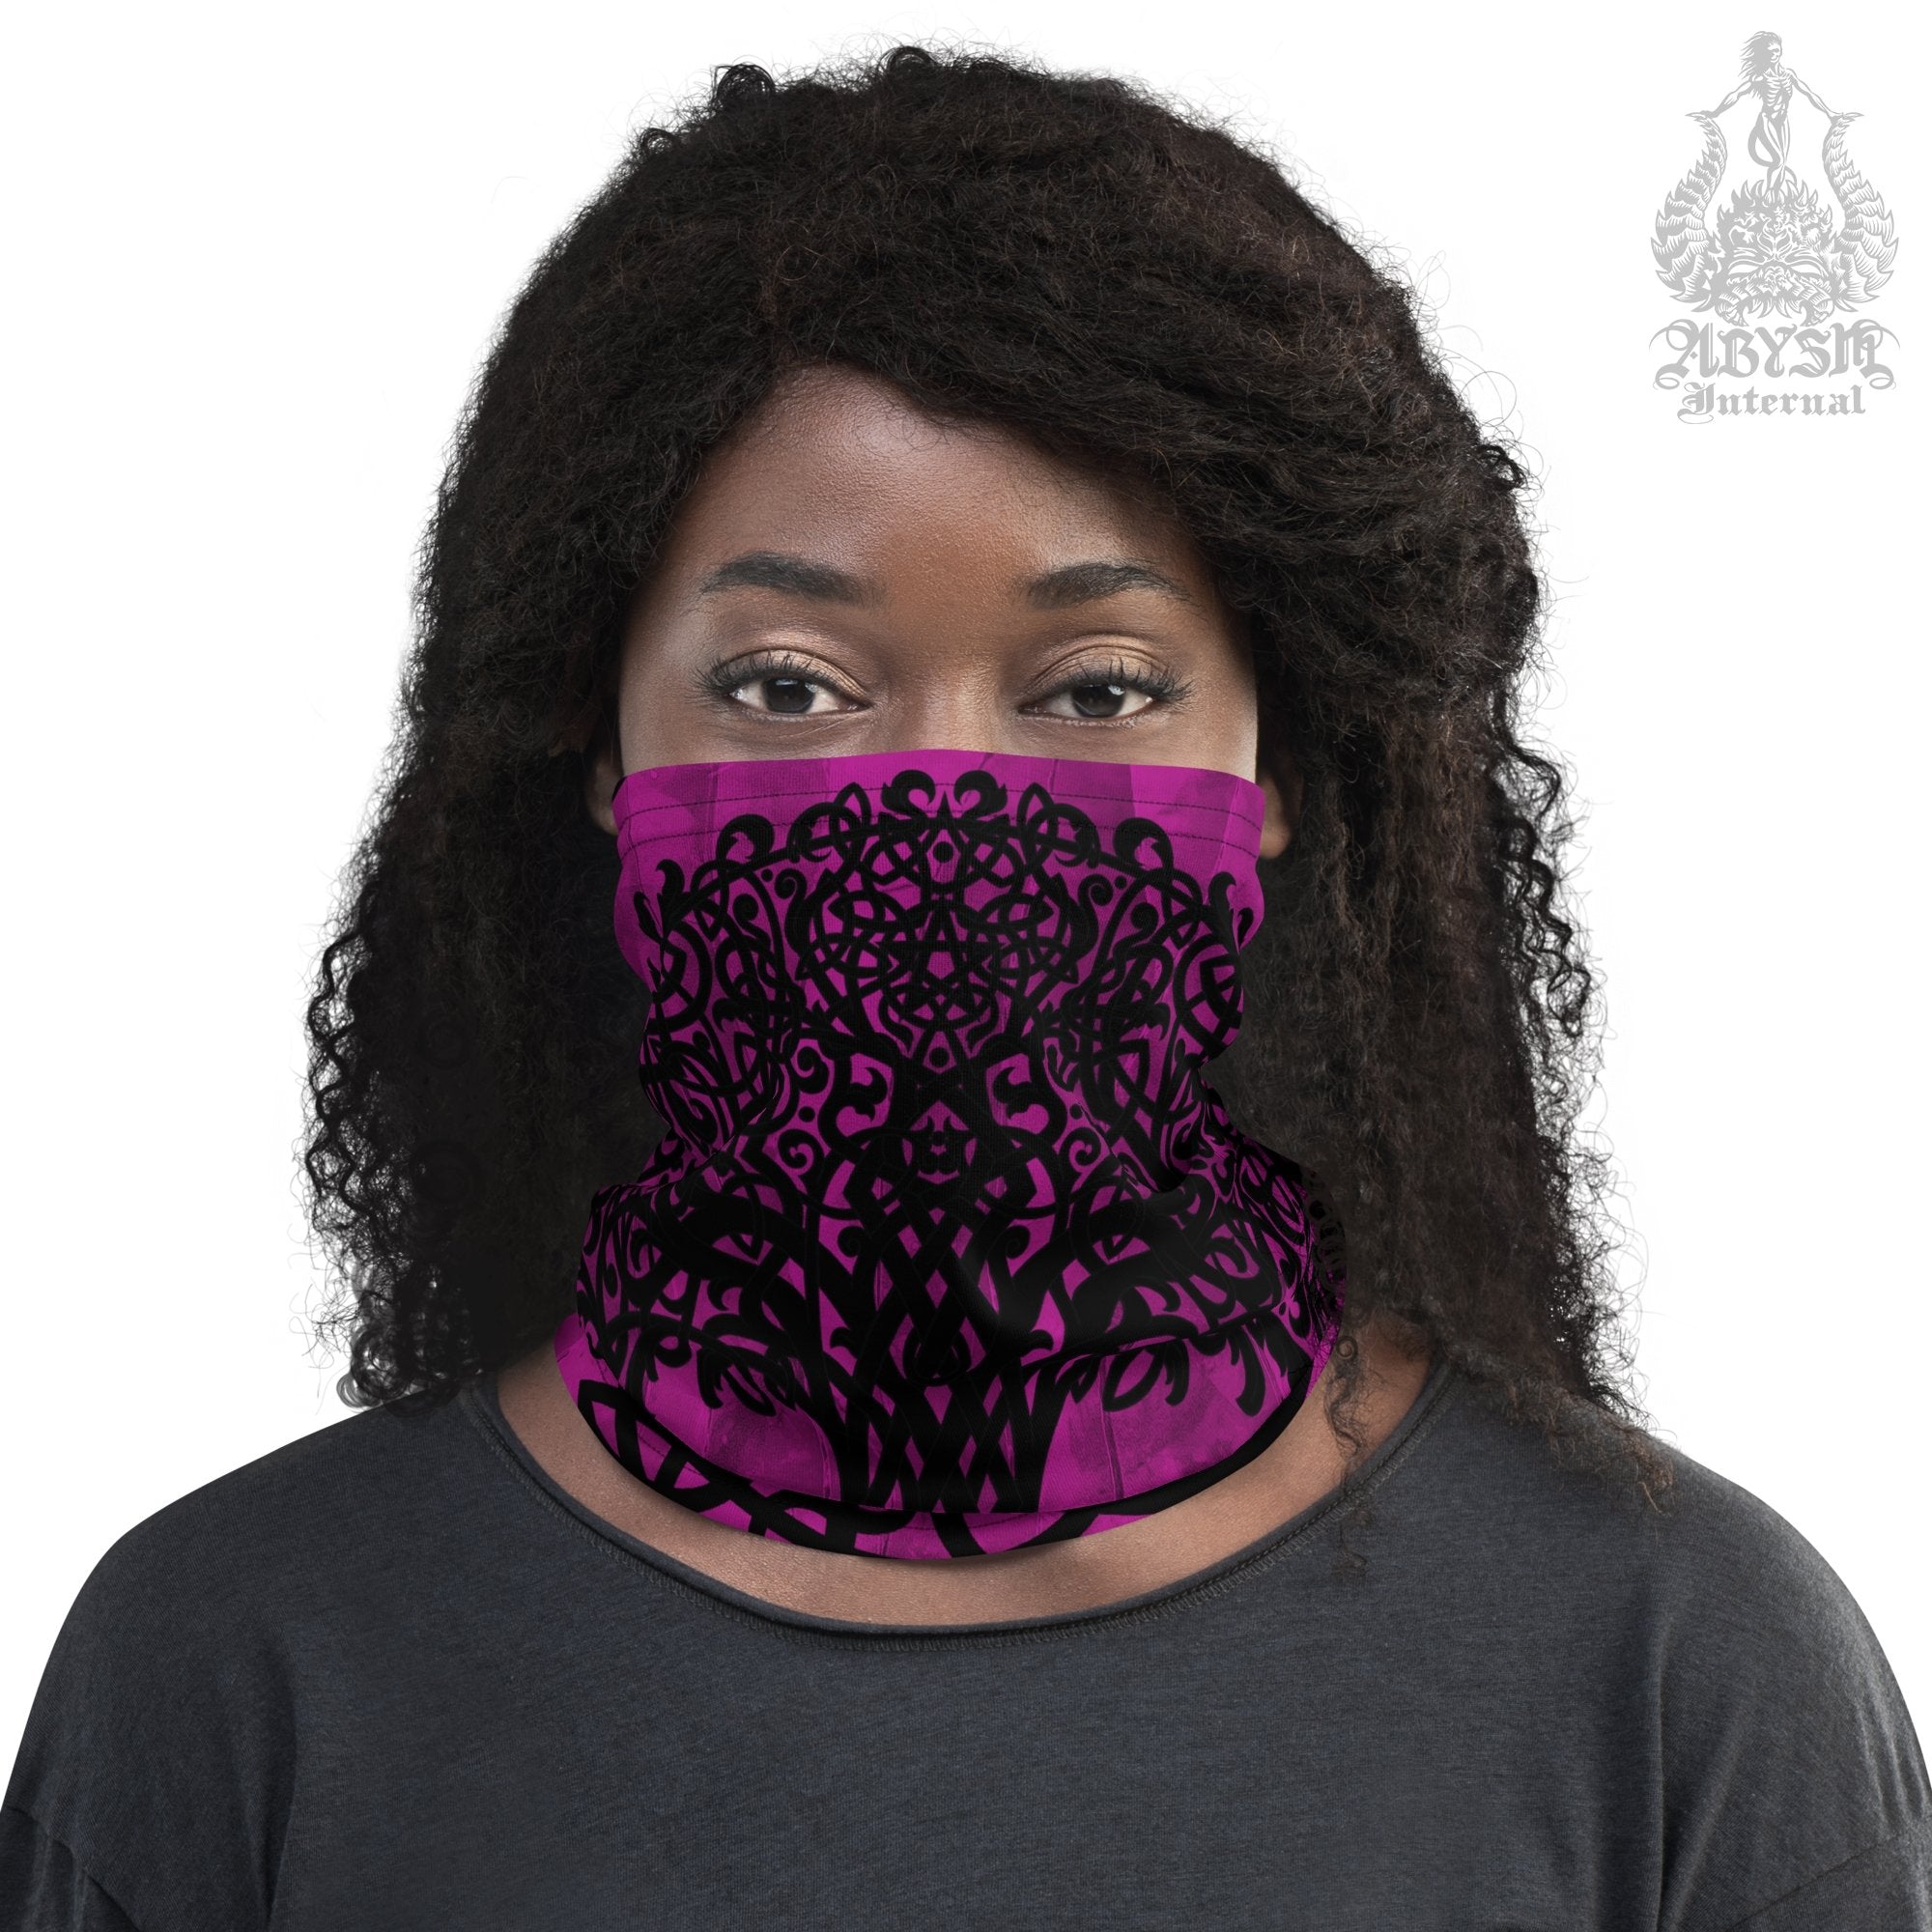 Witchy Neck Gaiter, Face Mask, Head Covering, Pagan Outfit, Tree of Life - Pink and Black - Abysm Internal